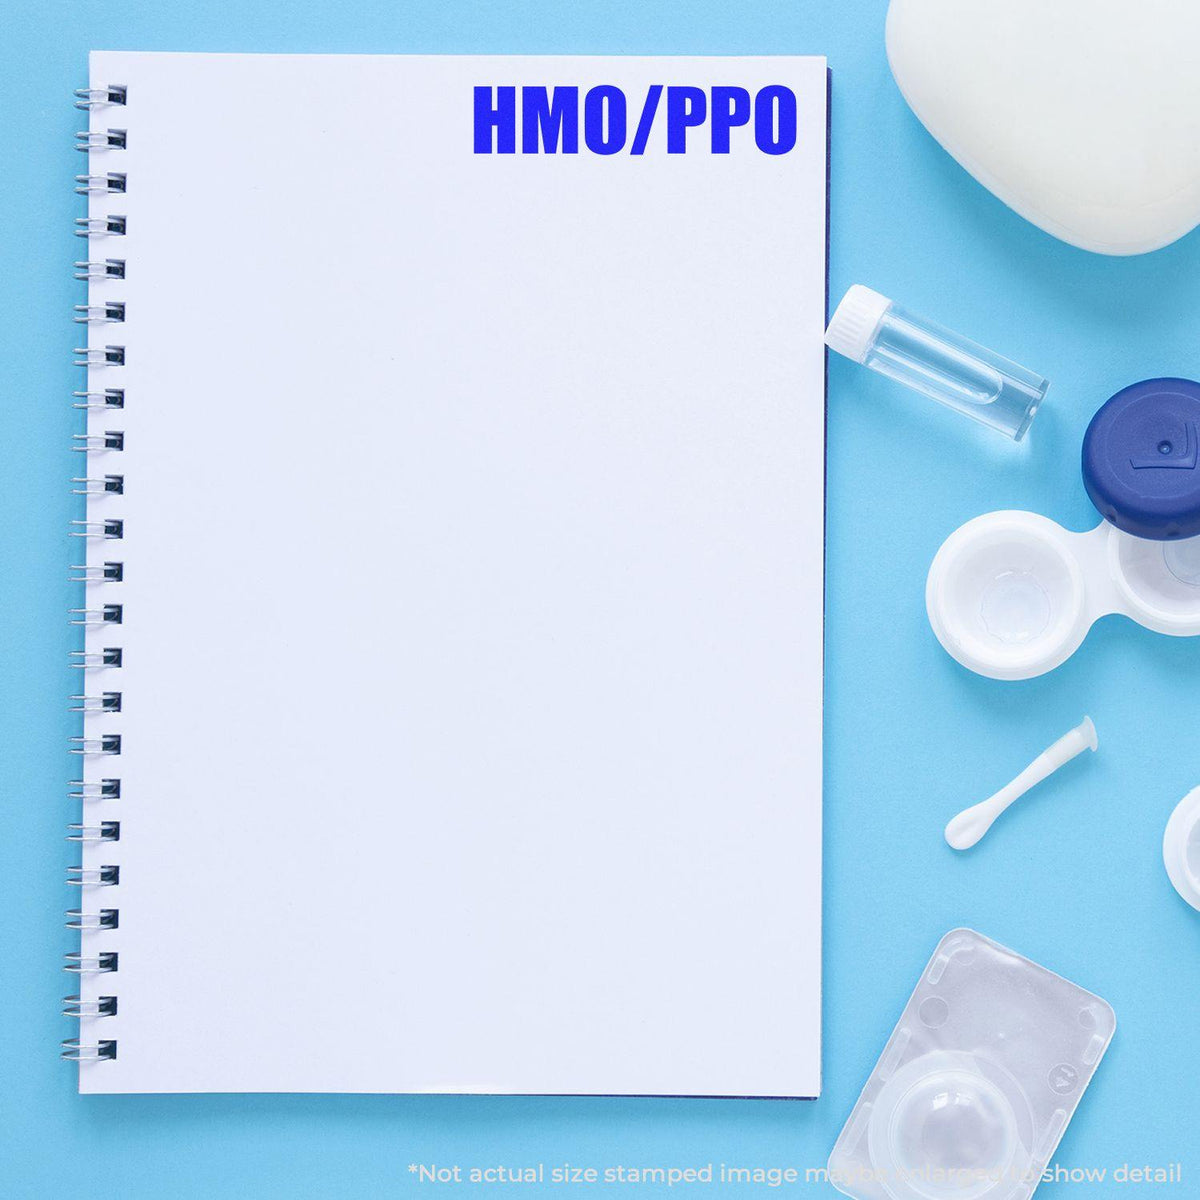 Medical Hmo Ppo Rubber Stamp - Engineer Seal Stamps - Brand_Acorn, Impression Size_Small, Stamp Type_Regular Stamp, Type of Use_Medical Office